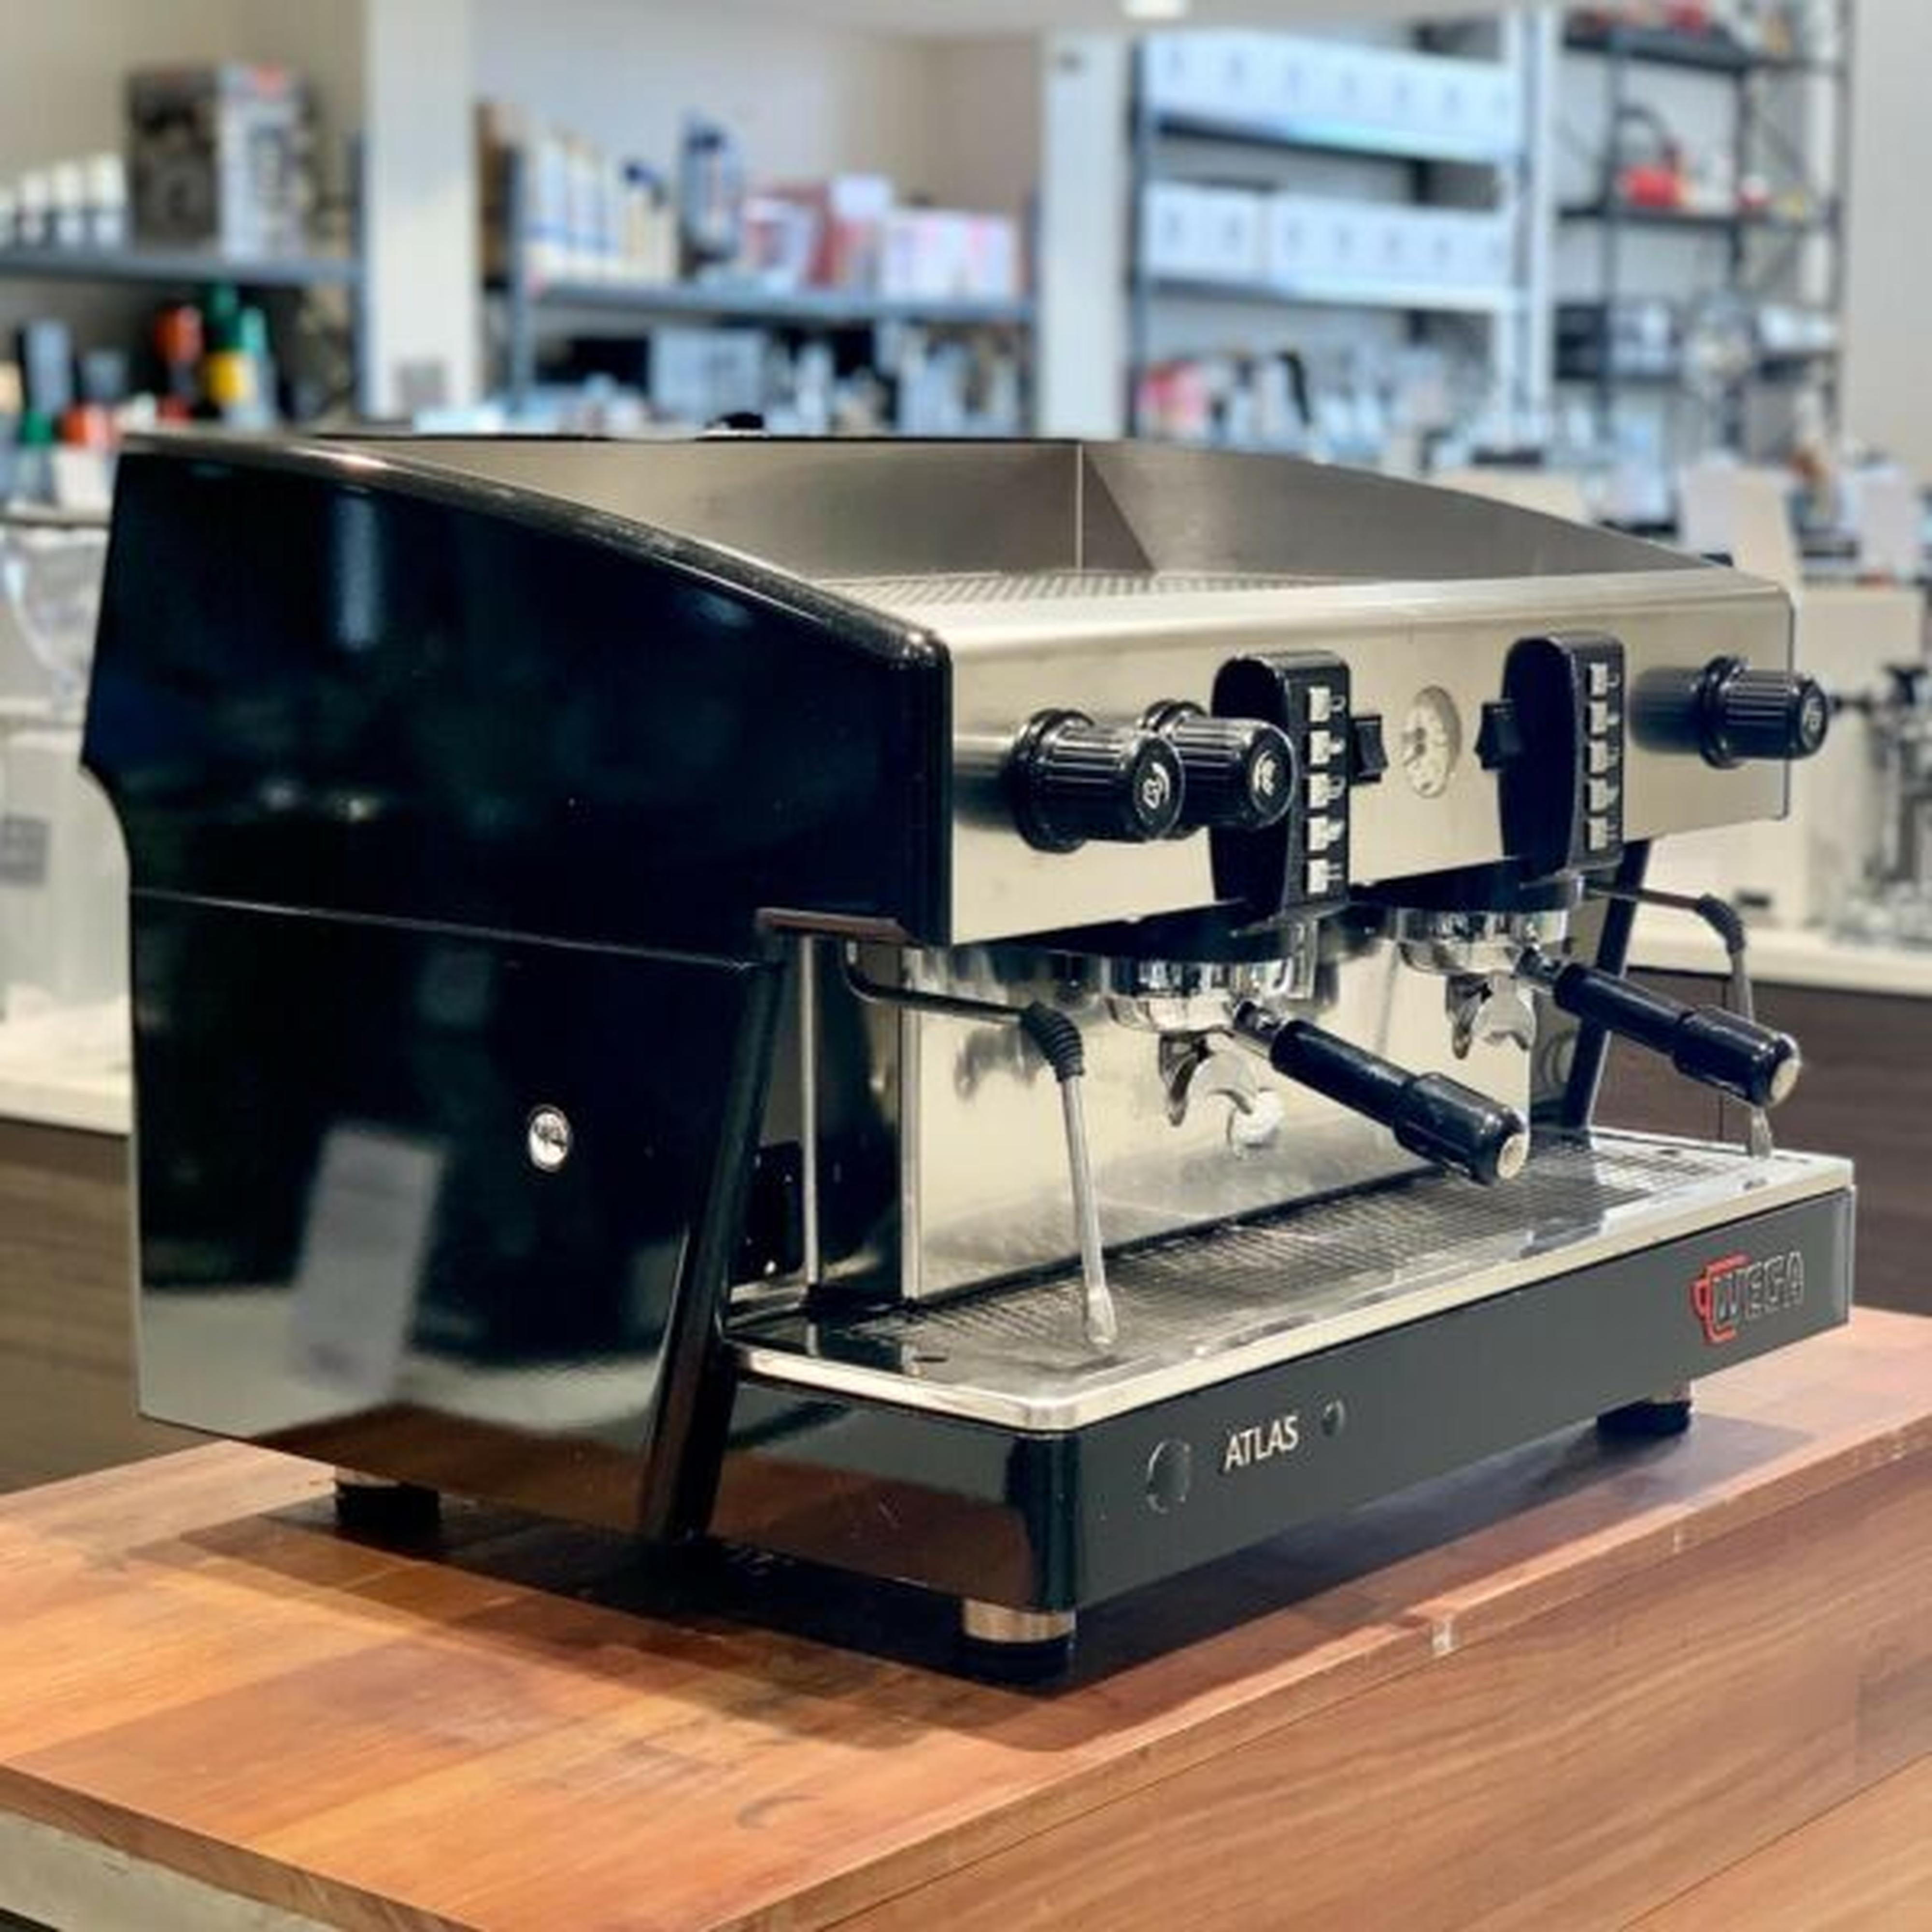 IMMACULATE 2 GROUP WEGA ATLAS COMMERCIAL COFFEE MACHINE